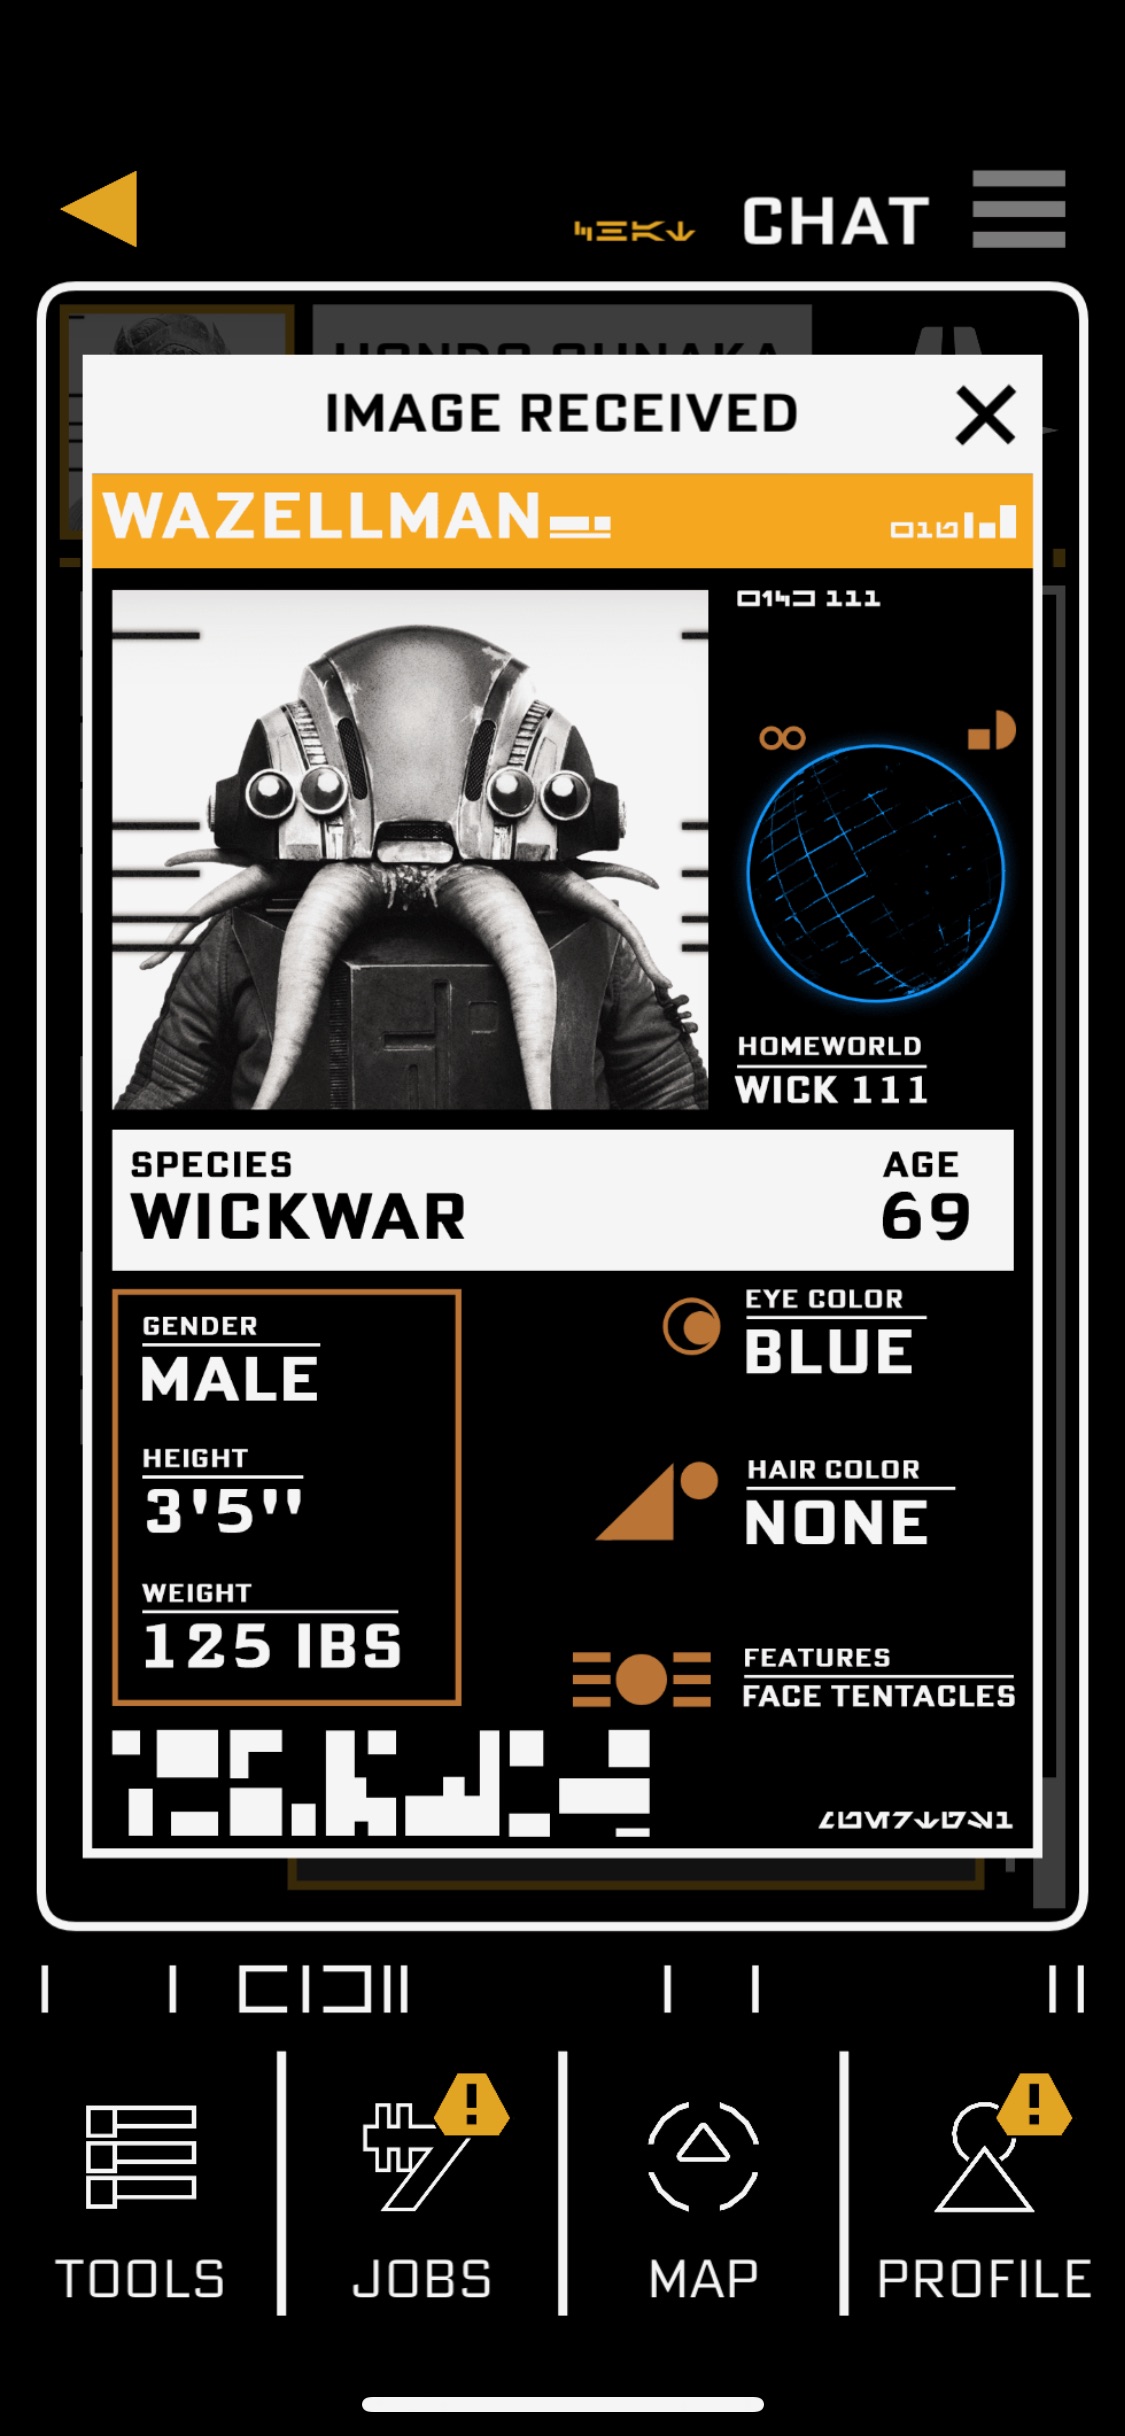 Screenshot of Star Wars: Galaxy's Edge app game featuring photo of Wickwar species with information about him underneath.